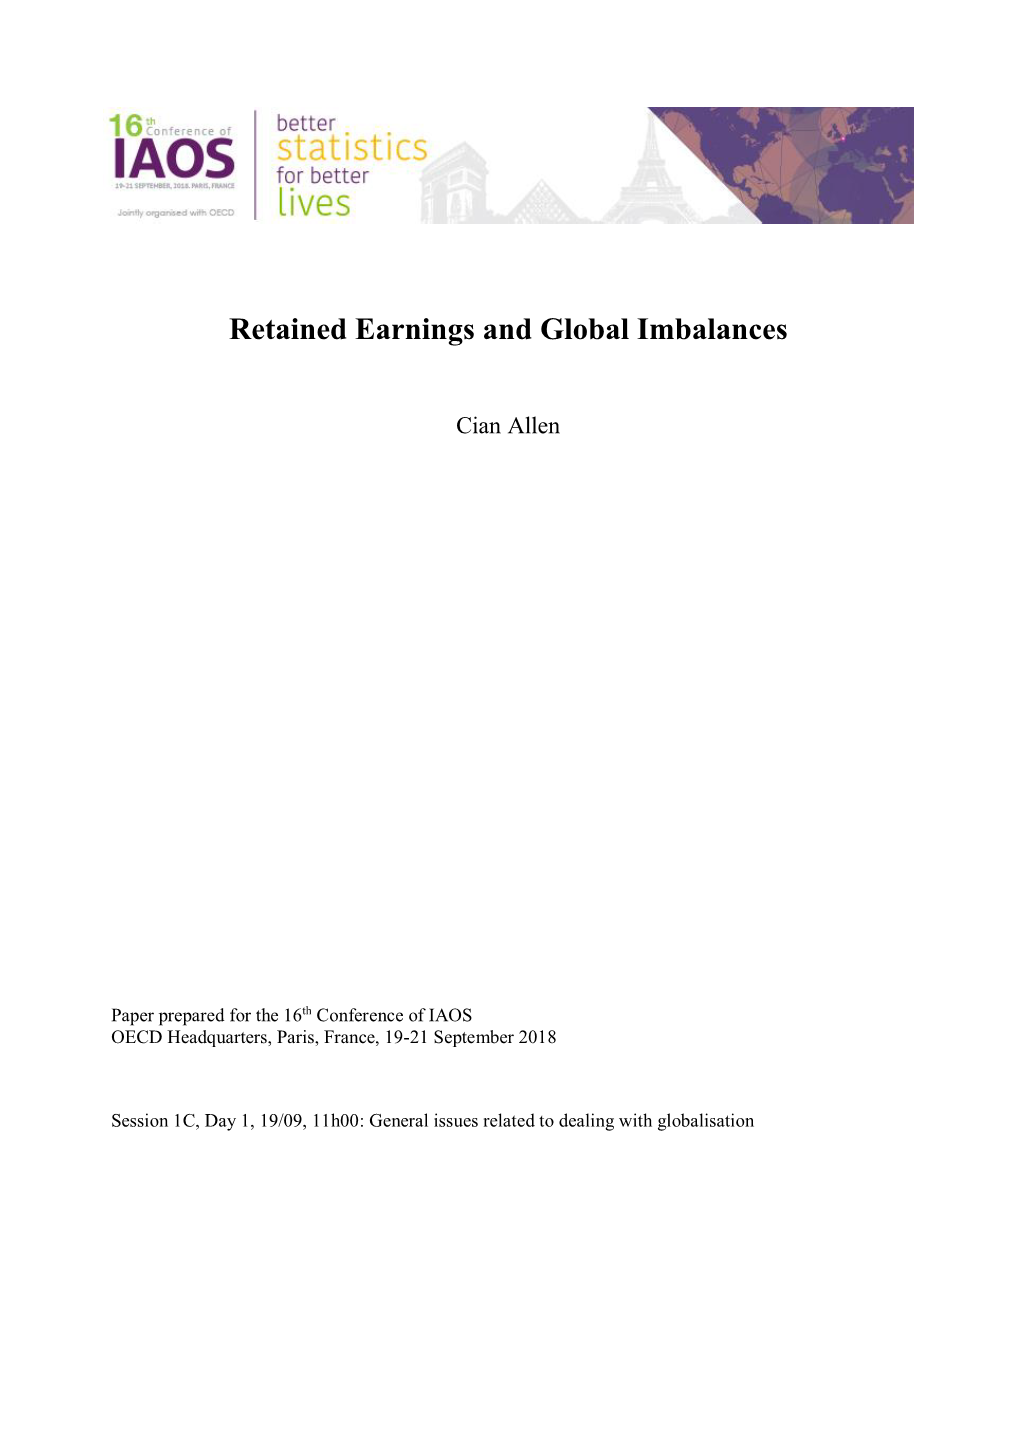 Retained Earnings and Global Imbalances